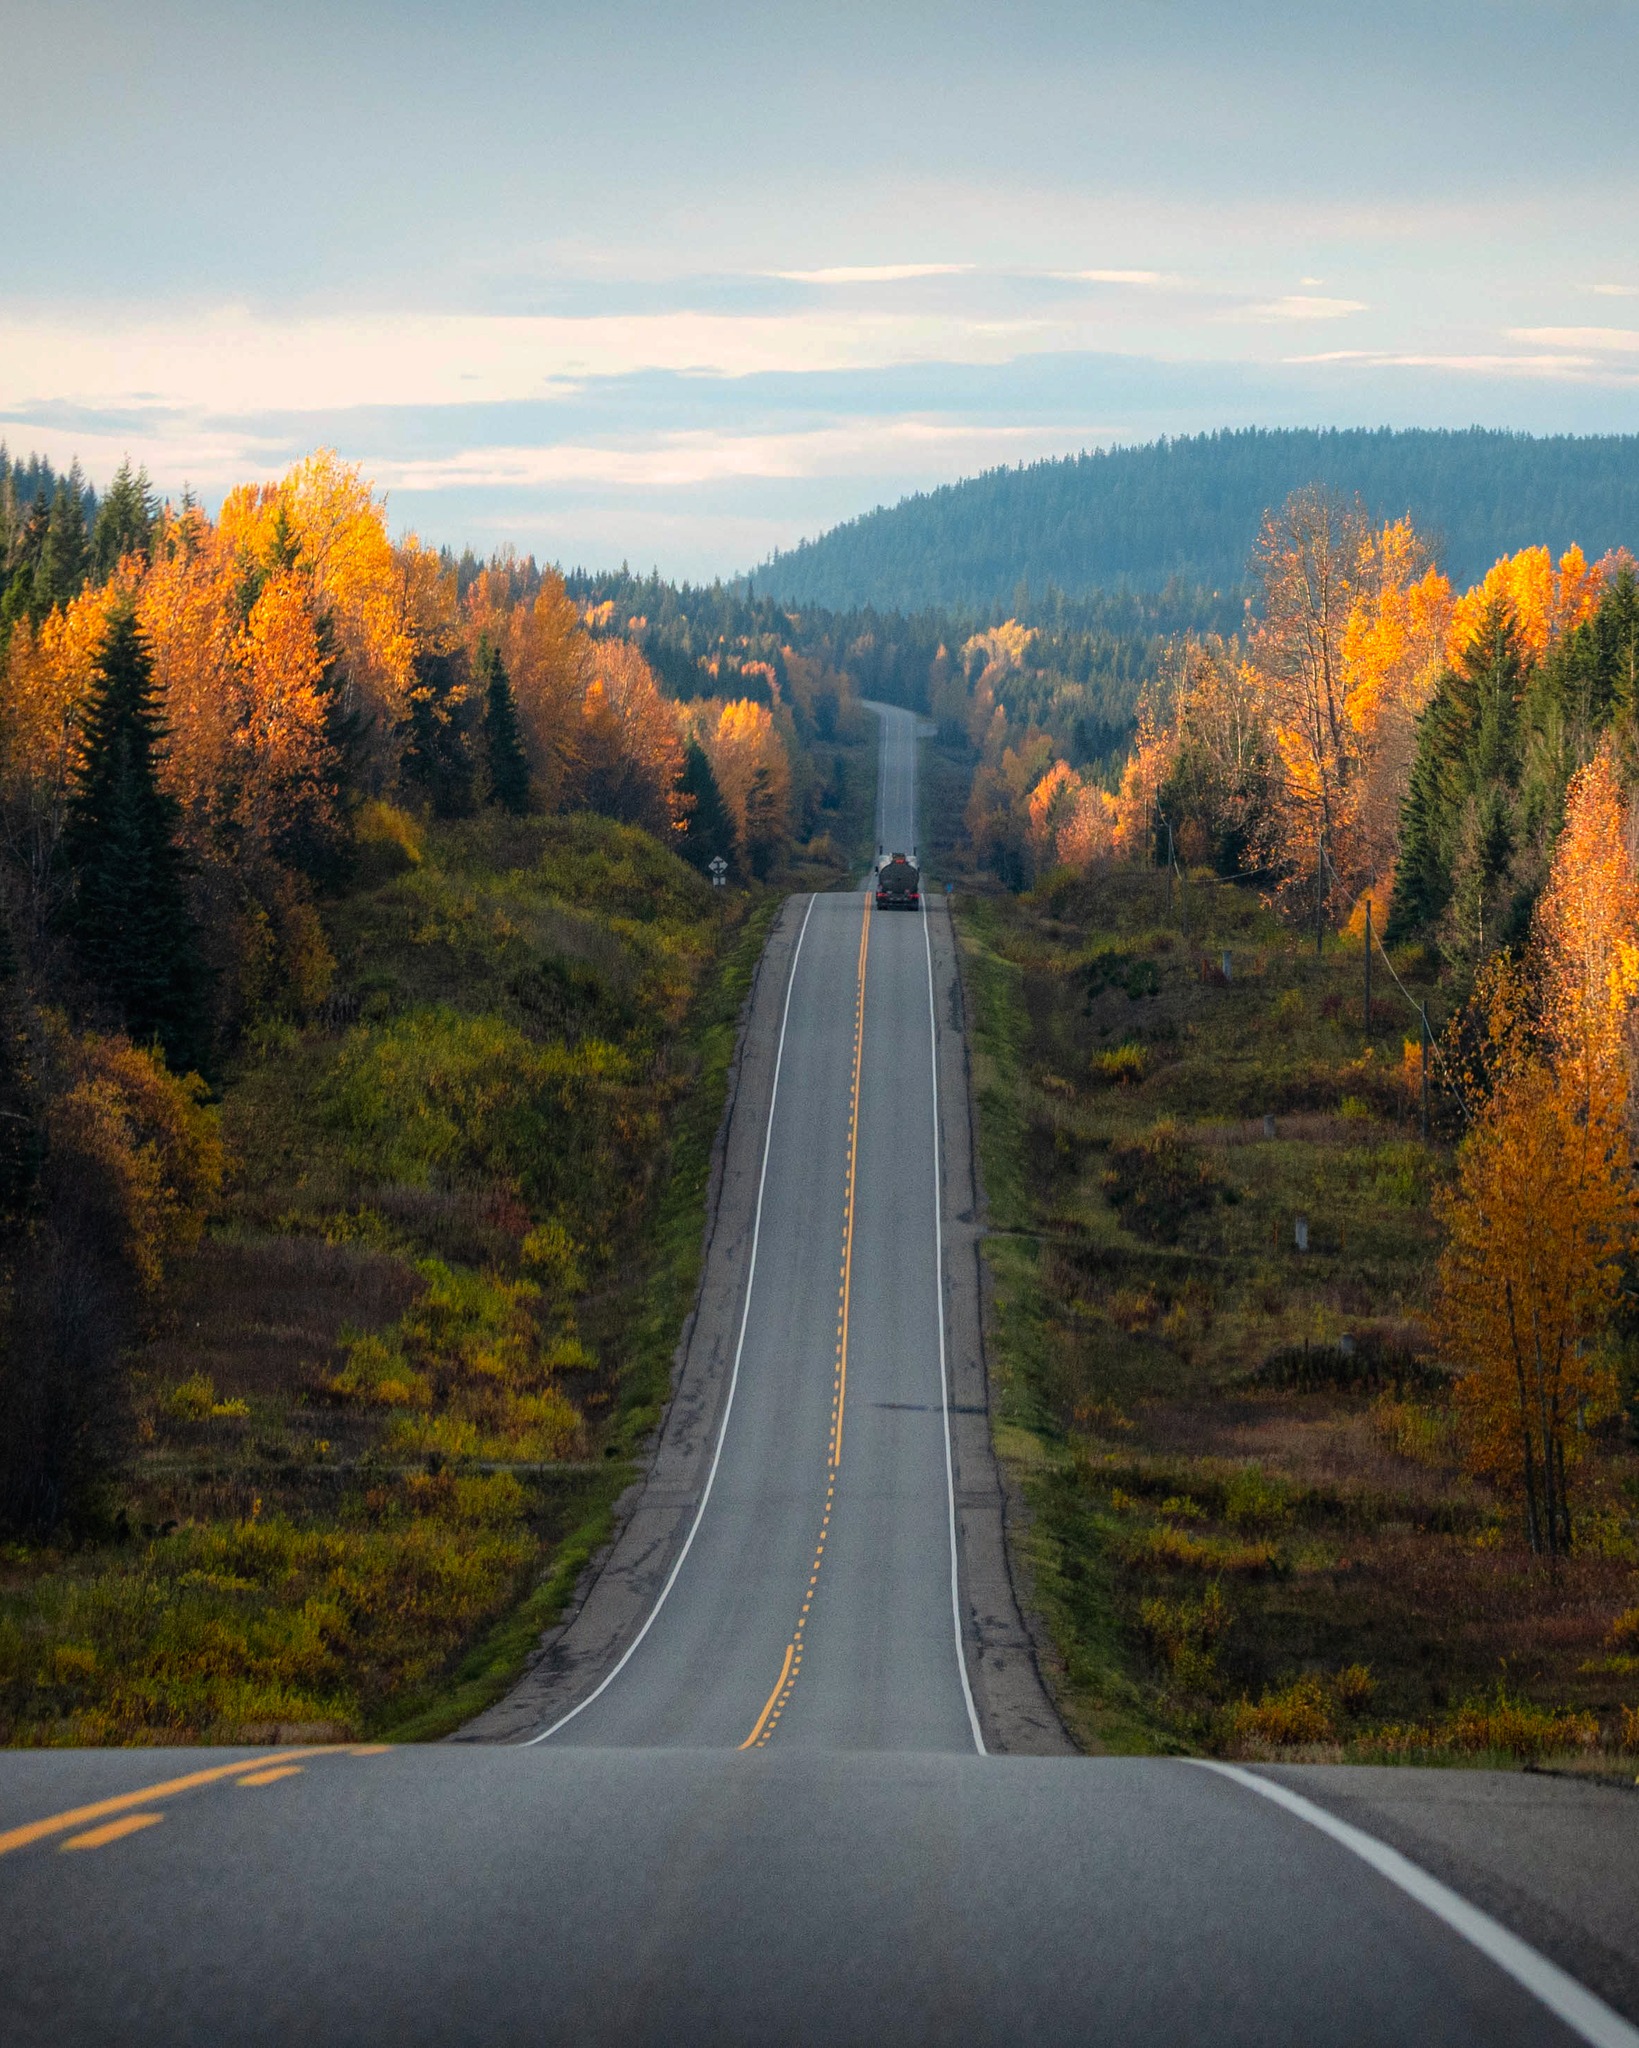 photo by maximilianruther caption reads: A few weeks ago, I went on a solo road trip down the Yellowhead Highway near Prince George. The fall scenery was stunning. 🍁🍂 I love this picture because it captures the highway's ups and downs, the vibrant fall colors, and the distant truck adding perspective. 📸 #FallRoadTrip #YellowheadHighway #AutumnJourney #ScenicDrive #princegeorgebc #canadahighway